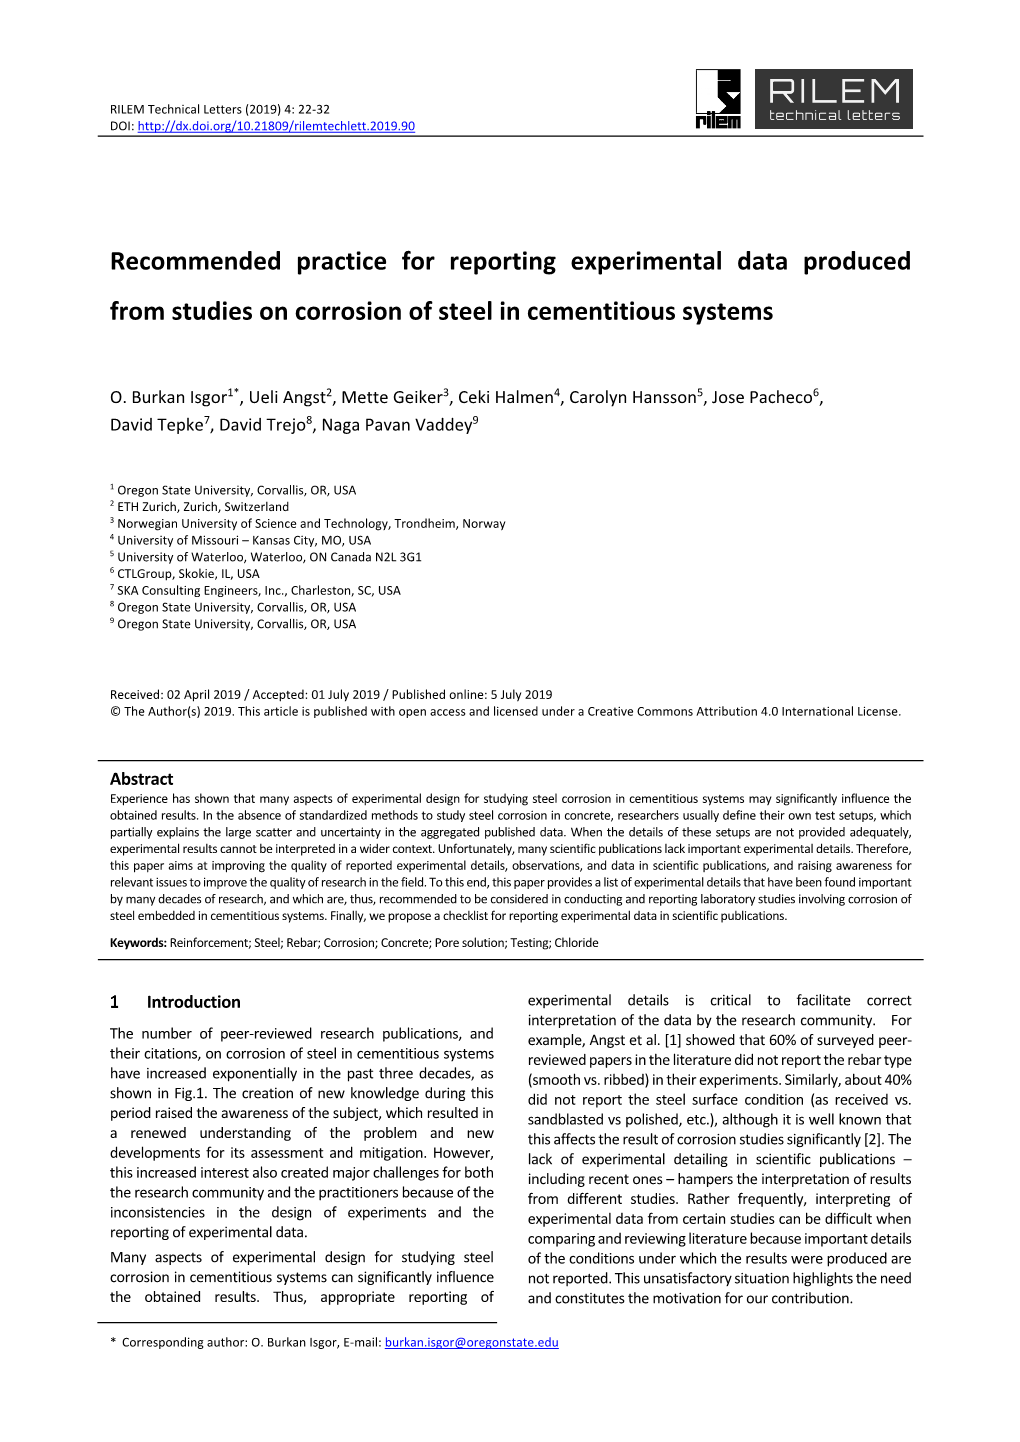 Recommended Practice for Reporting Experimental Data Produced from Studies on Corrosion of Steel in Cementitious Systems